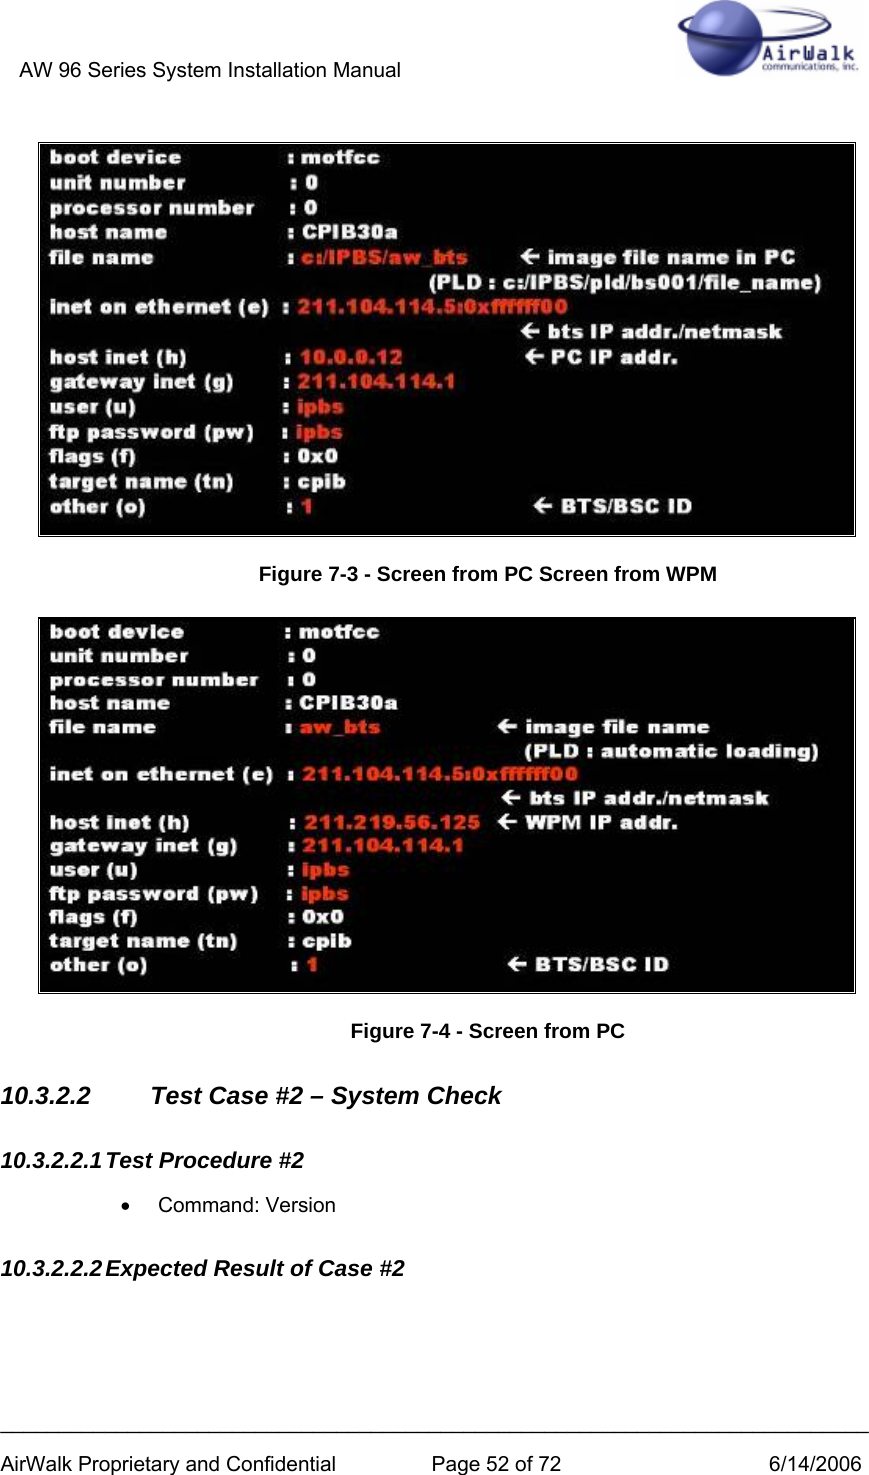 AW 96 Series System Installation Manual          ___________________________________________________________________________ AirWalk Proprietary and Confidential  Page 52 of 72  6/14/2006  Figure 7-3 - Screen from PC Screen from WPM  Figure 7-4 - Screen from PC 10.3.2.2  Test Case #2 – System Check 10.3.2.2.1 Test Procedure #2 • Command: Version 10.3.2.2.2 Expected Result of Case #2 